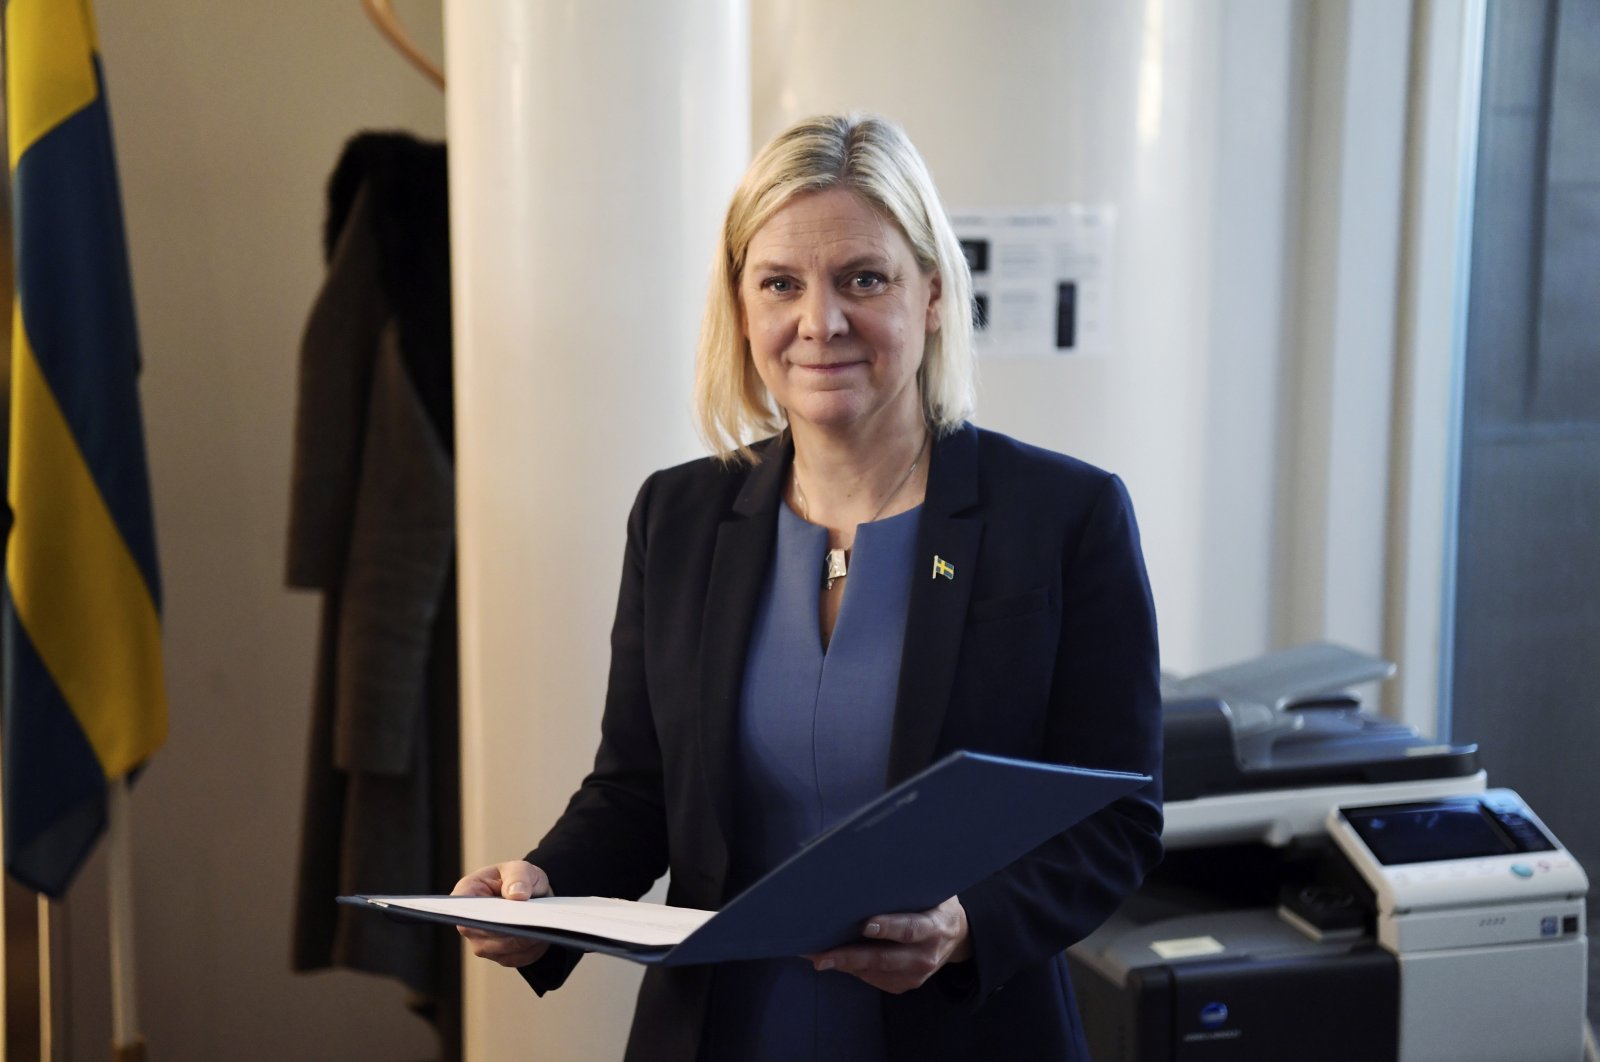 Sweden&#039;s Finance Minister and Social Democratic Party leader Magdalena Andersson poses for a photo during a press conference after being appointed new prime minister, in Stockholm, Nov. 24, 2021. (Erik Simander/TT News Agency via AP)